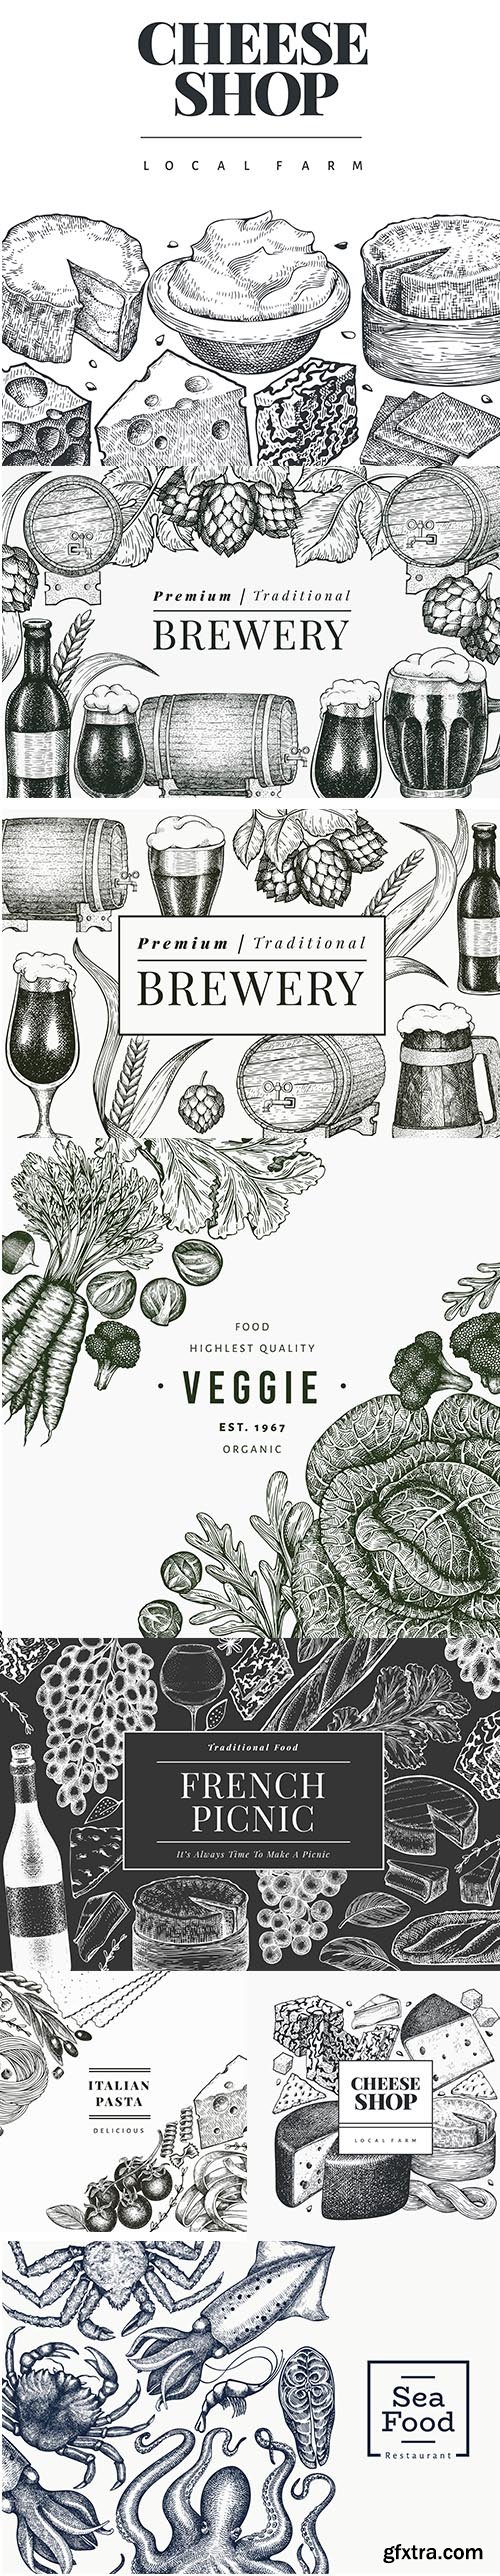 Hand-Drawn Sketch Vegetables and Food Design Template